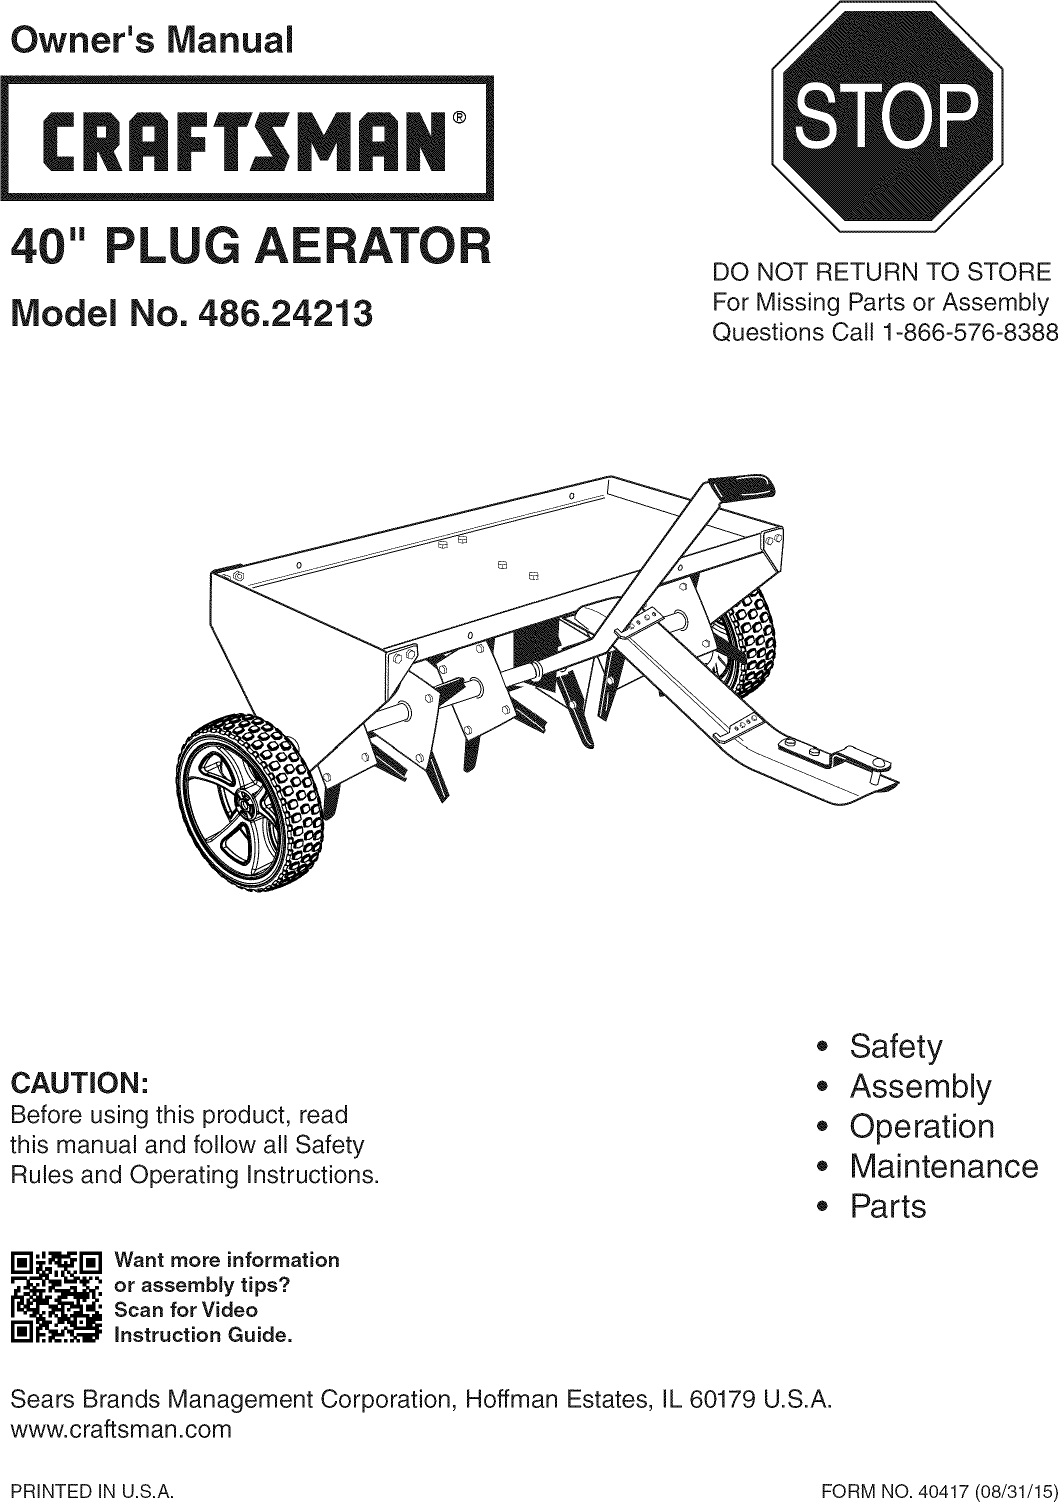 Page 1 of 12 - Craftsman 48624213 1602004L User Manual  40 PLUG AERATOR - Manuals And Guides